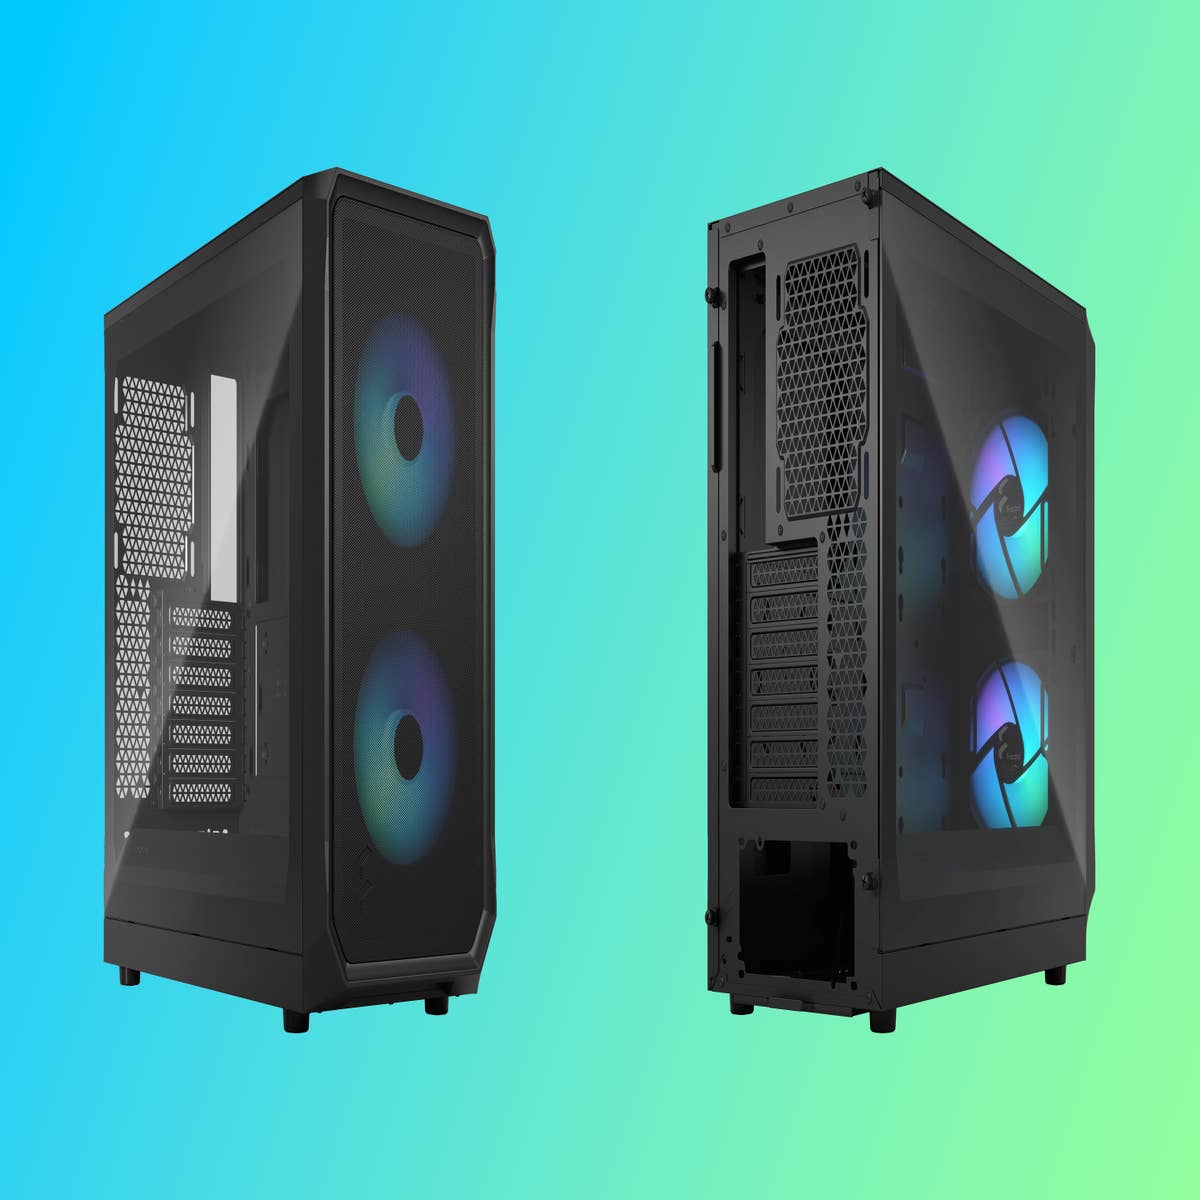 New Fractal Focus 2 case now available!